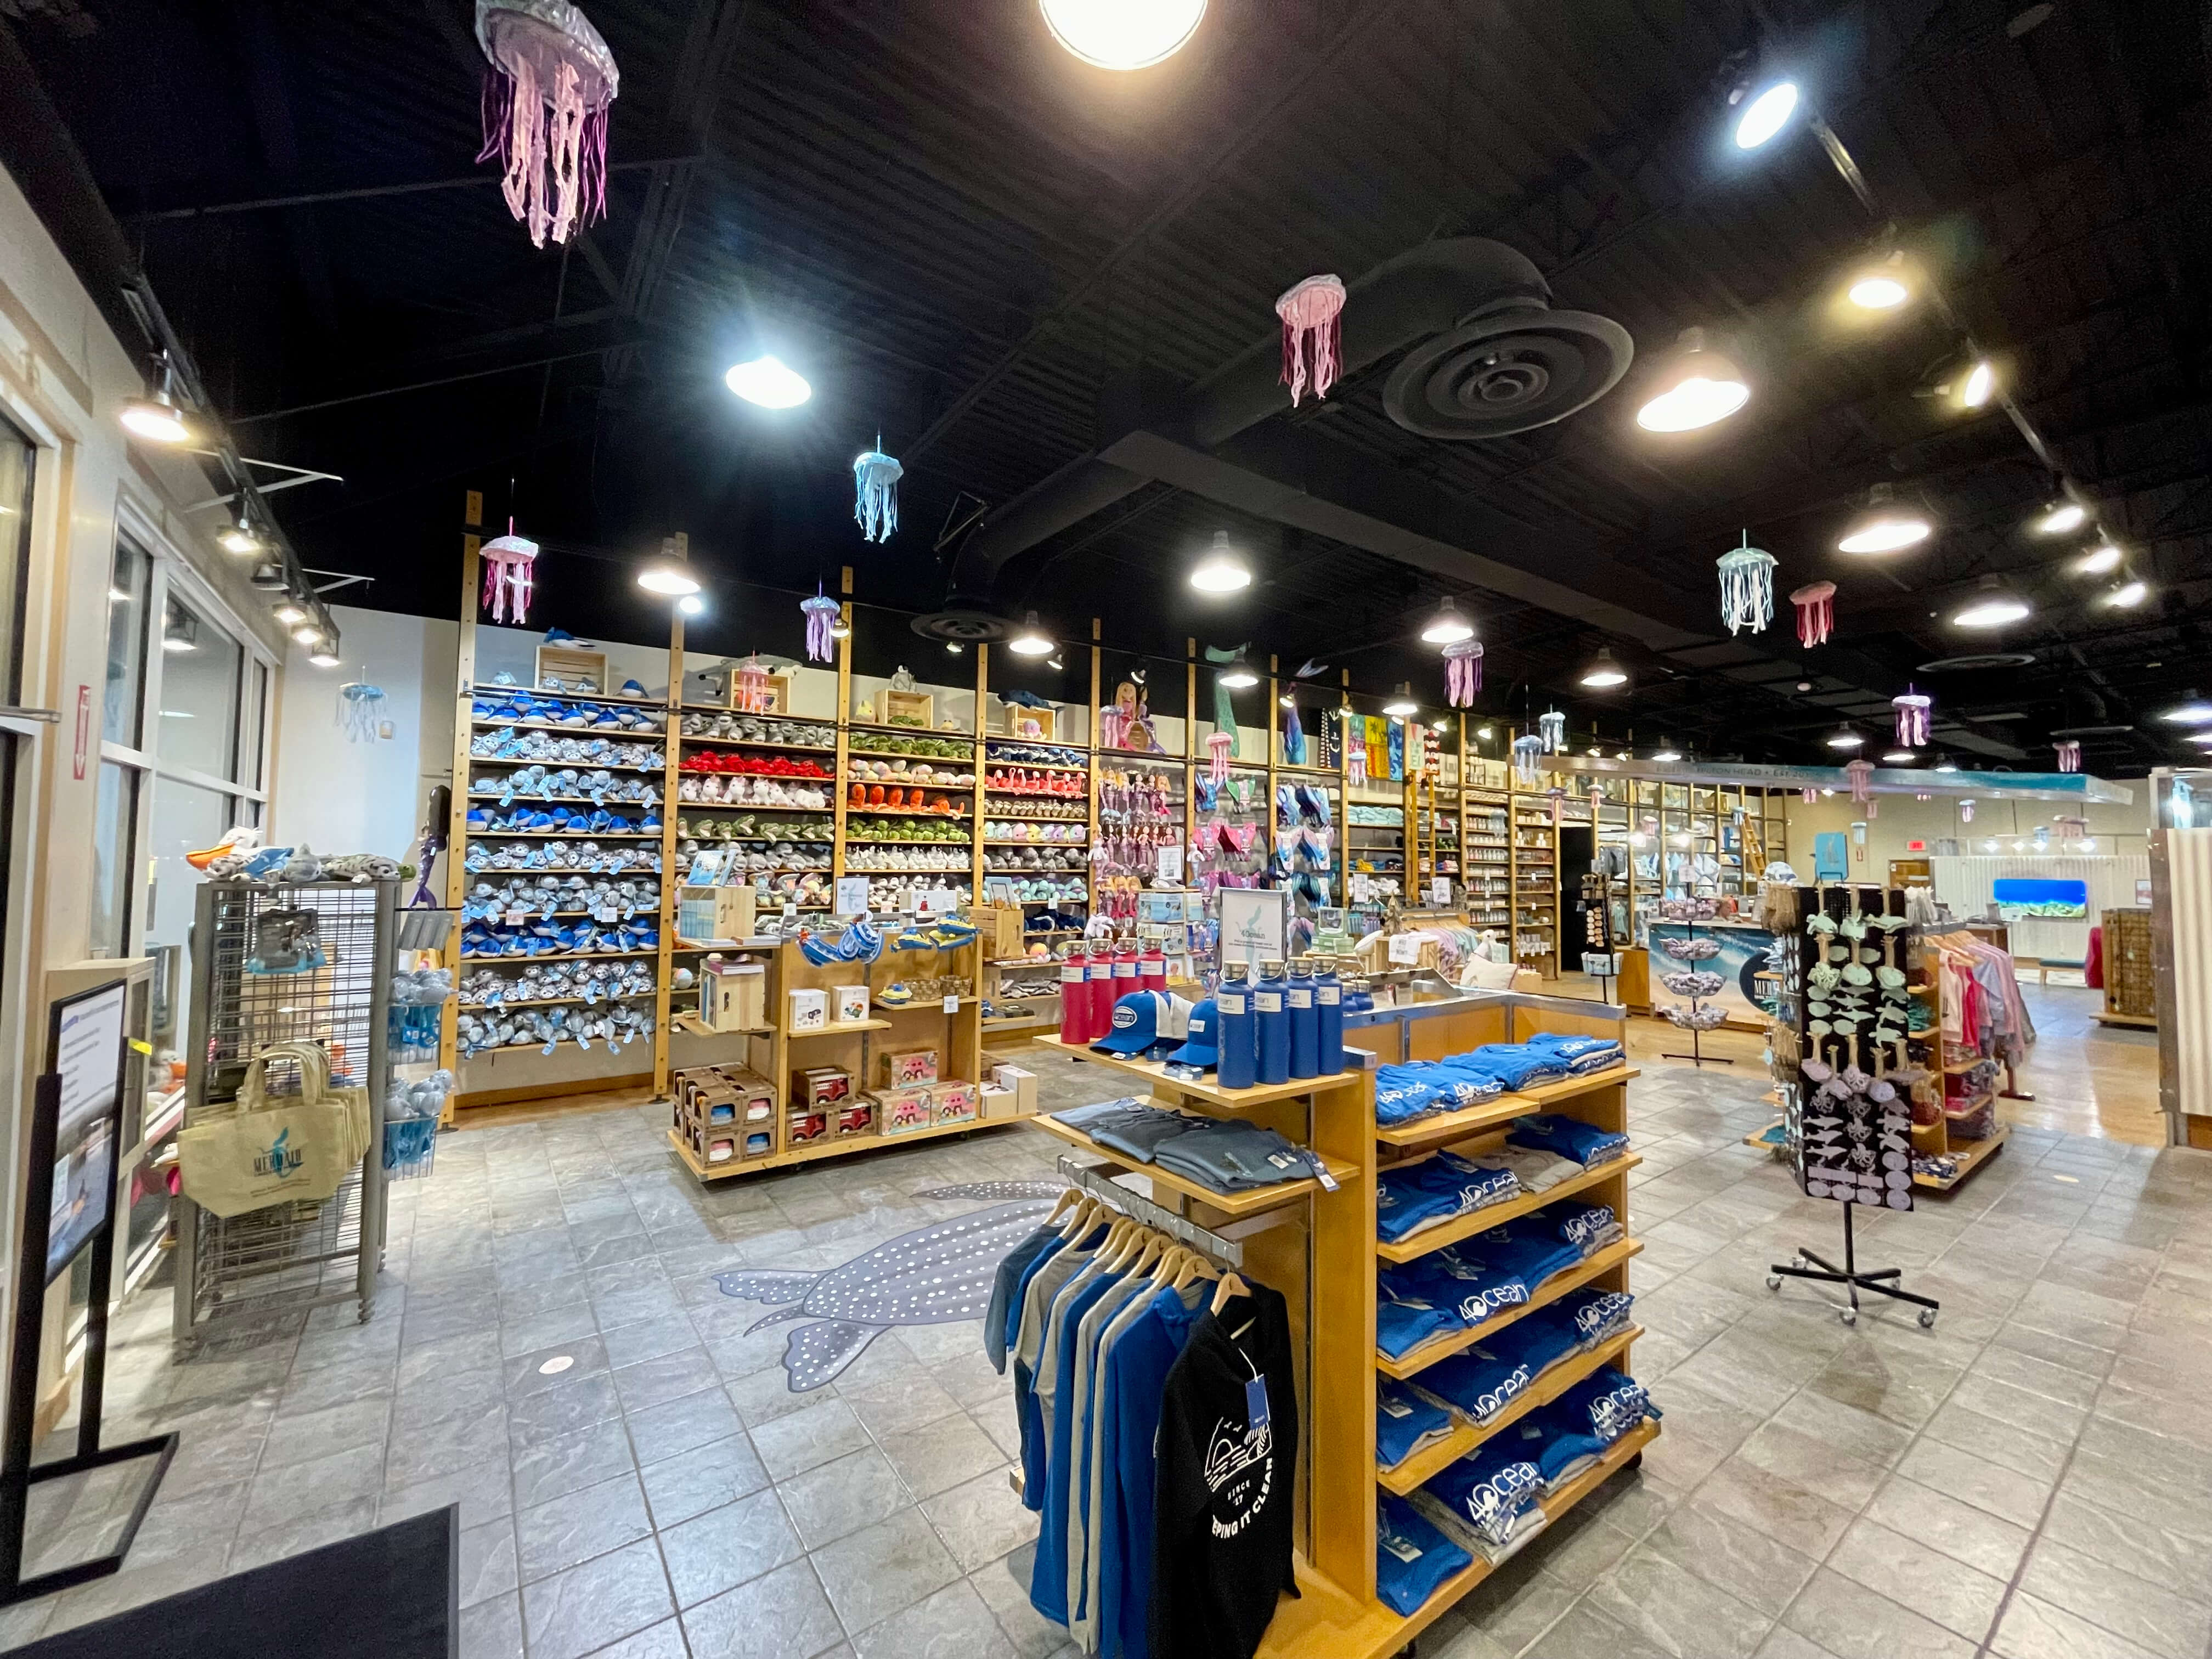 Overview of Mermaid store